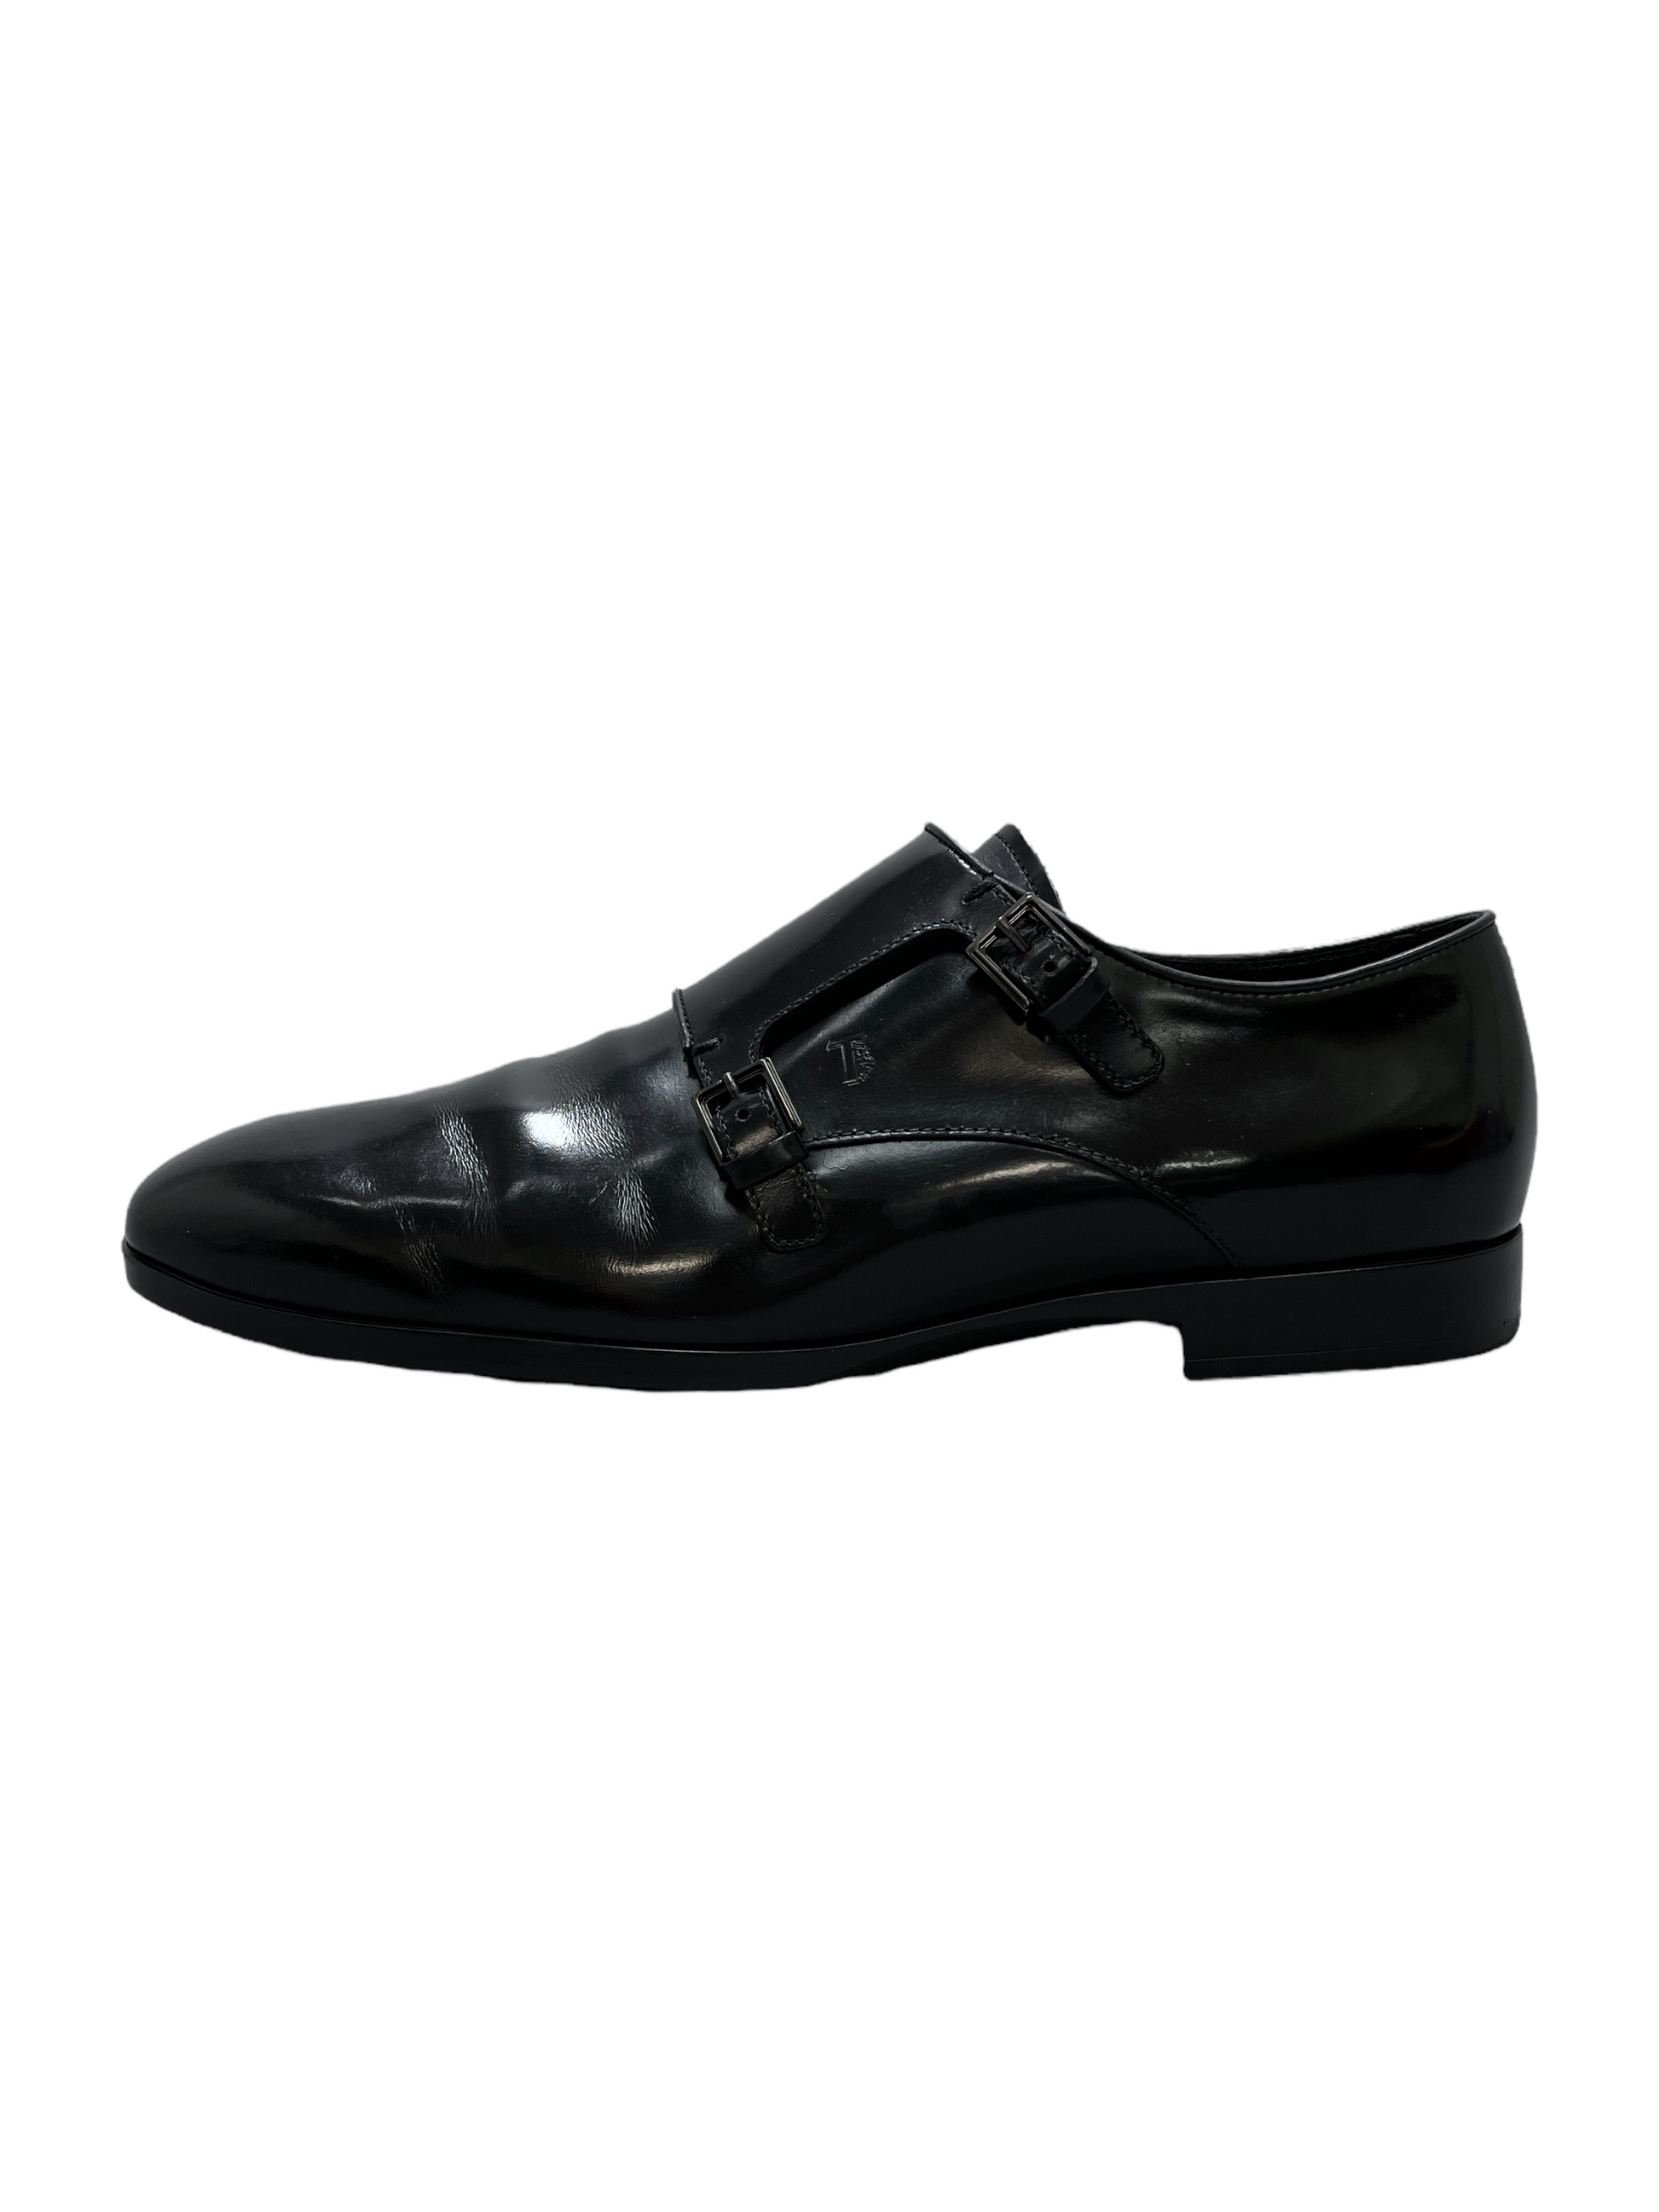 Tods Black Leather Double Monkstrap Dress Shoes 10 D US — Genuine Design luxury consignment Calgary New & pre-owned clothing, shoes, accessories.